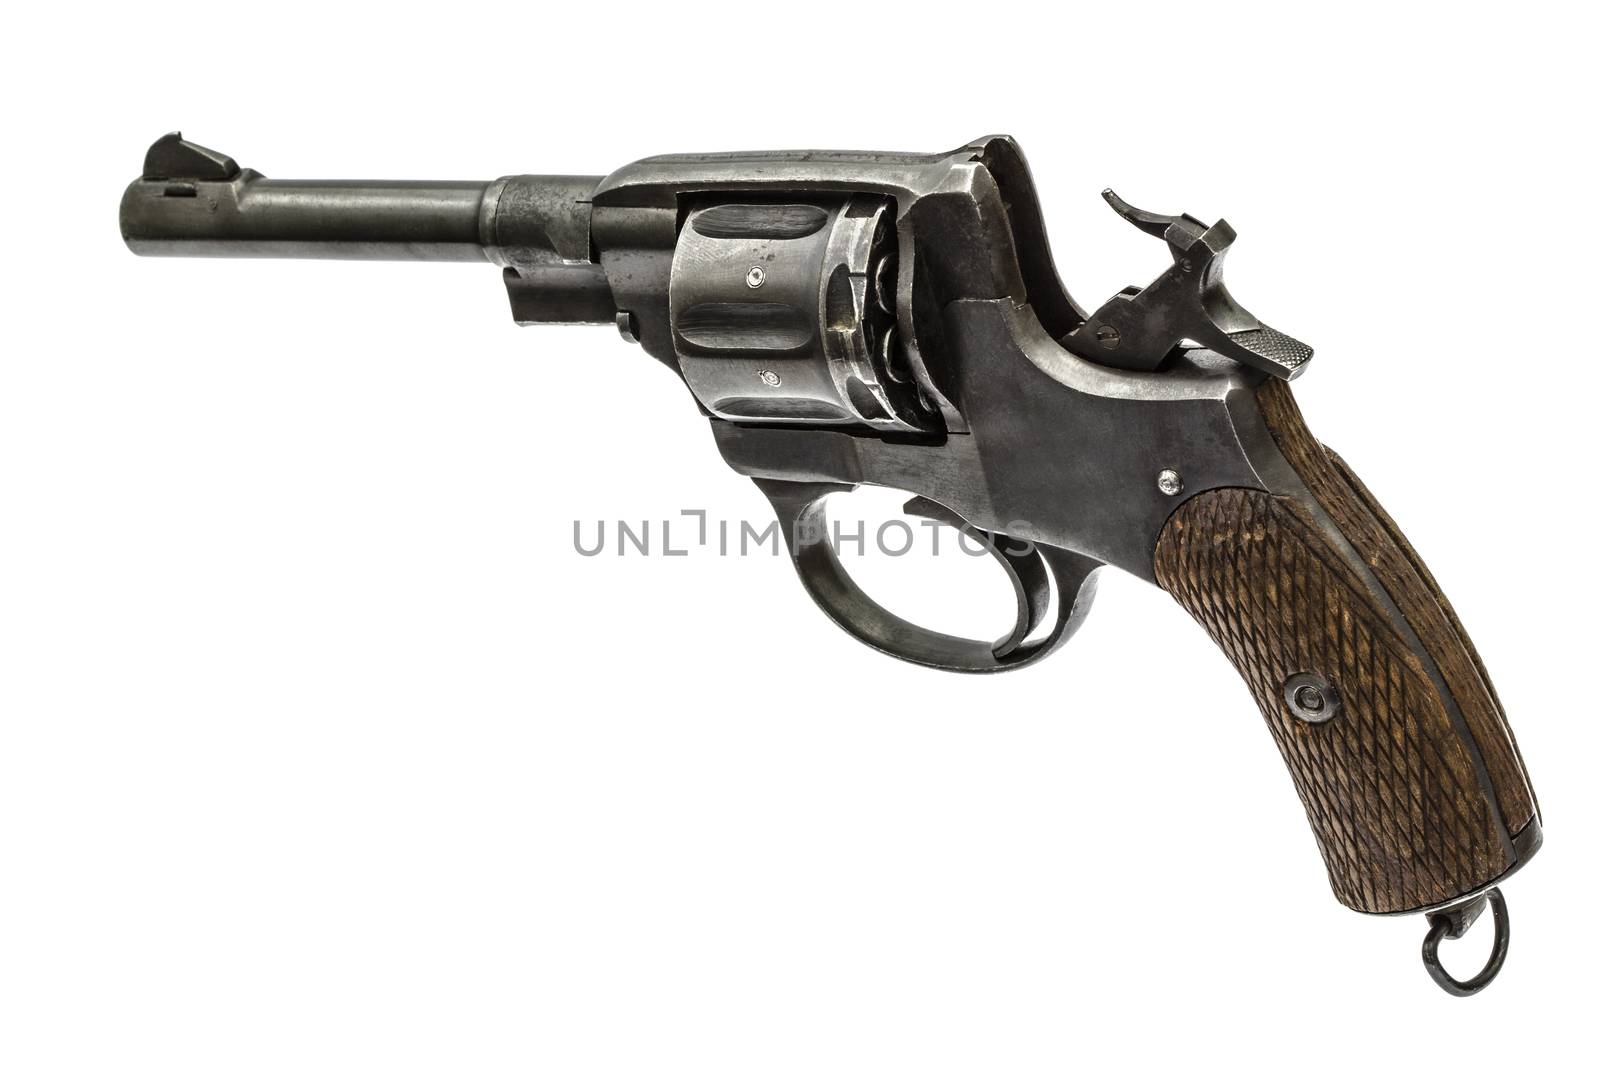 Old pistol with the hammer cocked, isolated on white background by kostiuchenko